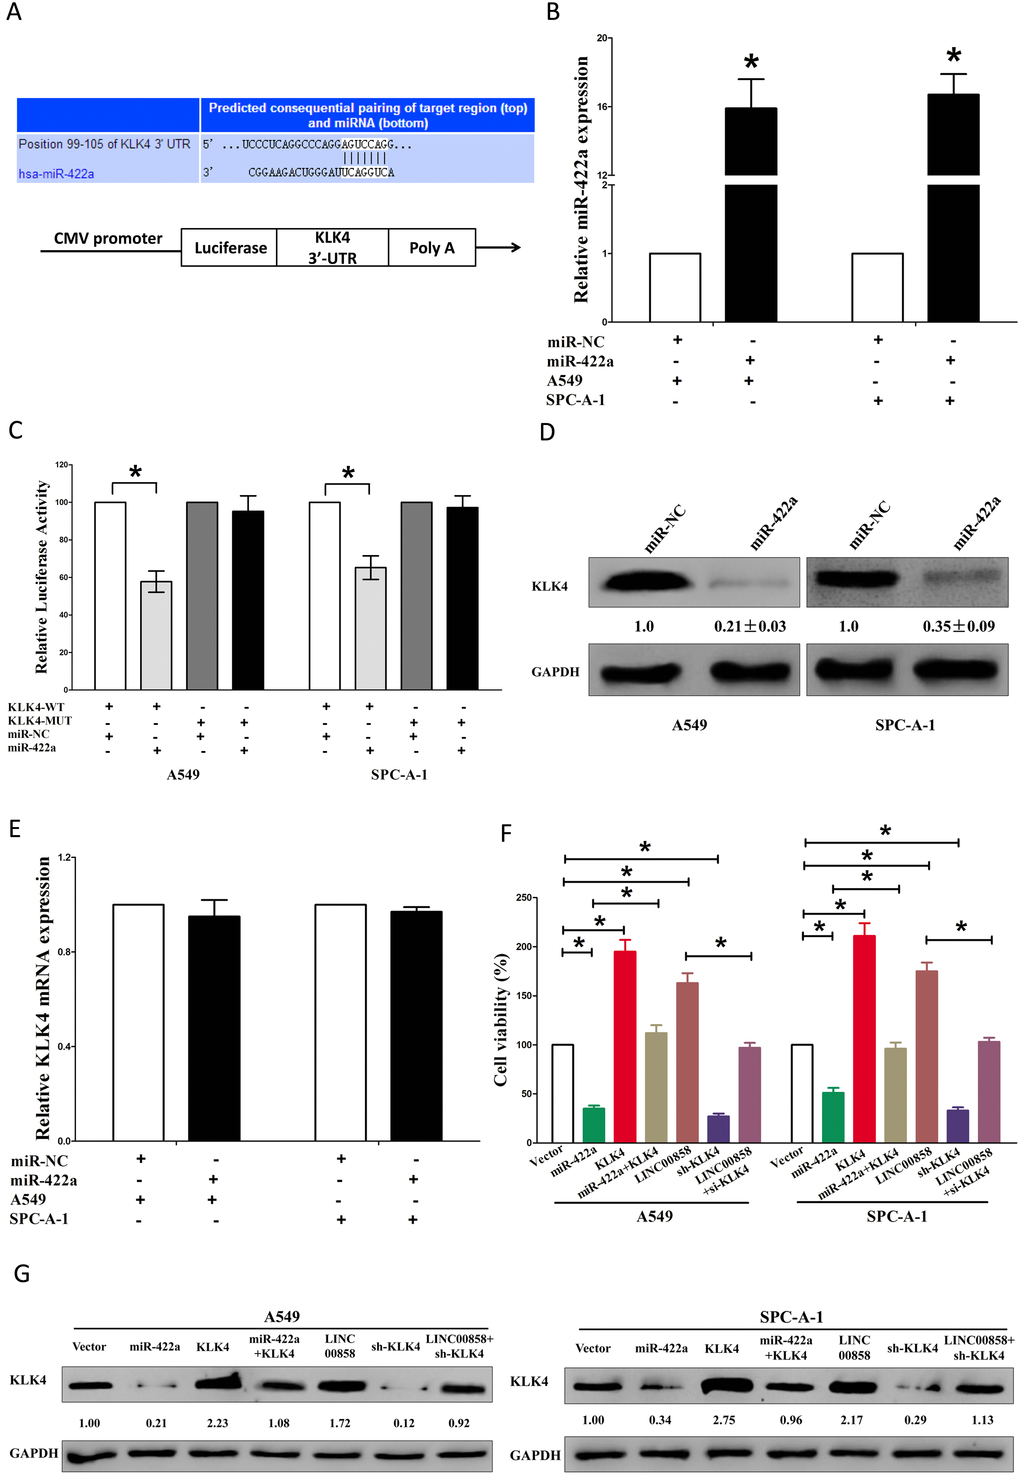 LINC00858's pro-proliferative activity is in part through negative regulation of miRNA-422a, and then activation of KLK4 in NSCLC cells. (A) The 3'-UTR of KLK4 harbors one miR-422a cognate site. (B) Relative miR-422a expression after transfection with miR-NC and miR-422a. (C) Relative luciferase activity of reporter plasmids carrying wild-type or mutant KLK4 3'-UTR in A549 and SPC-A-1 cells co-transfected with miR-NC or miR-422a. (D) Relative KLK4 protein expression after transfection with miR-NC and miR-422a. (E) Relative KLK4 mRNA expression after transfection with miR-NC and miR-422a. (F) Statistical analysis of trypan blue staining. (G) Protein expression of KLK4 in Vector, miR-422a, pcDNA3.1-CT-GFP-KLK4, miR-422a plus pcDNA3.1-CT-GFP-KLK4, pcDNA3.1-CT-GFP-LINC00858, sh-KLK4, or pcDNA3.1-CT-GFP-LINC00858 +sh-KLK4 treated A549 and SPC-A-1 cells. Assays were performed in triplicate. *P 